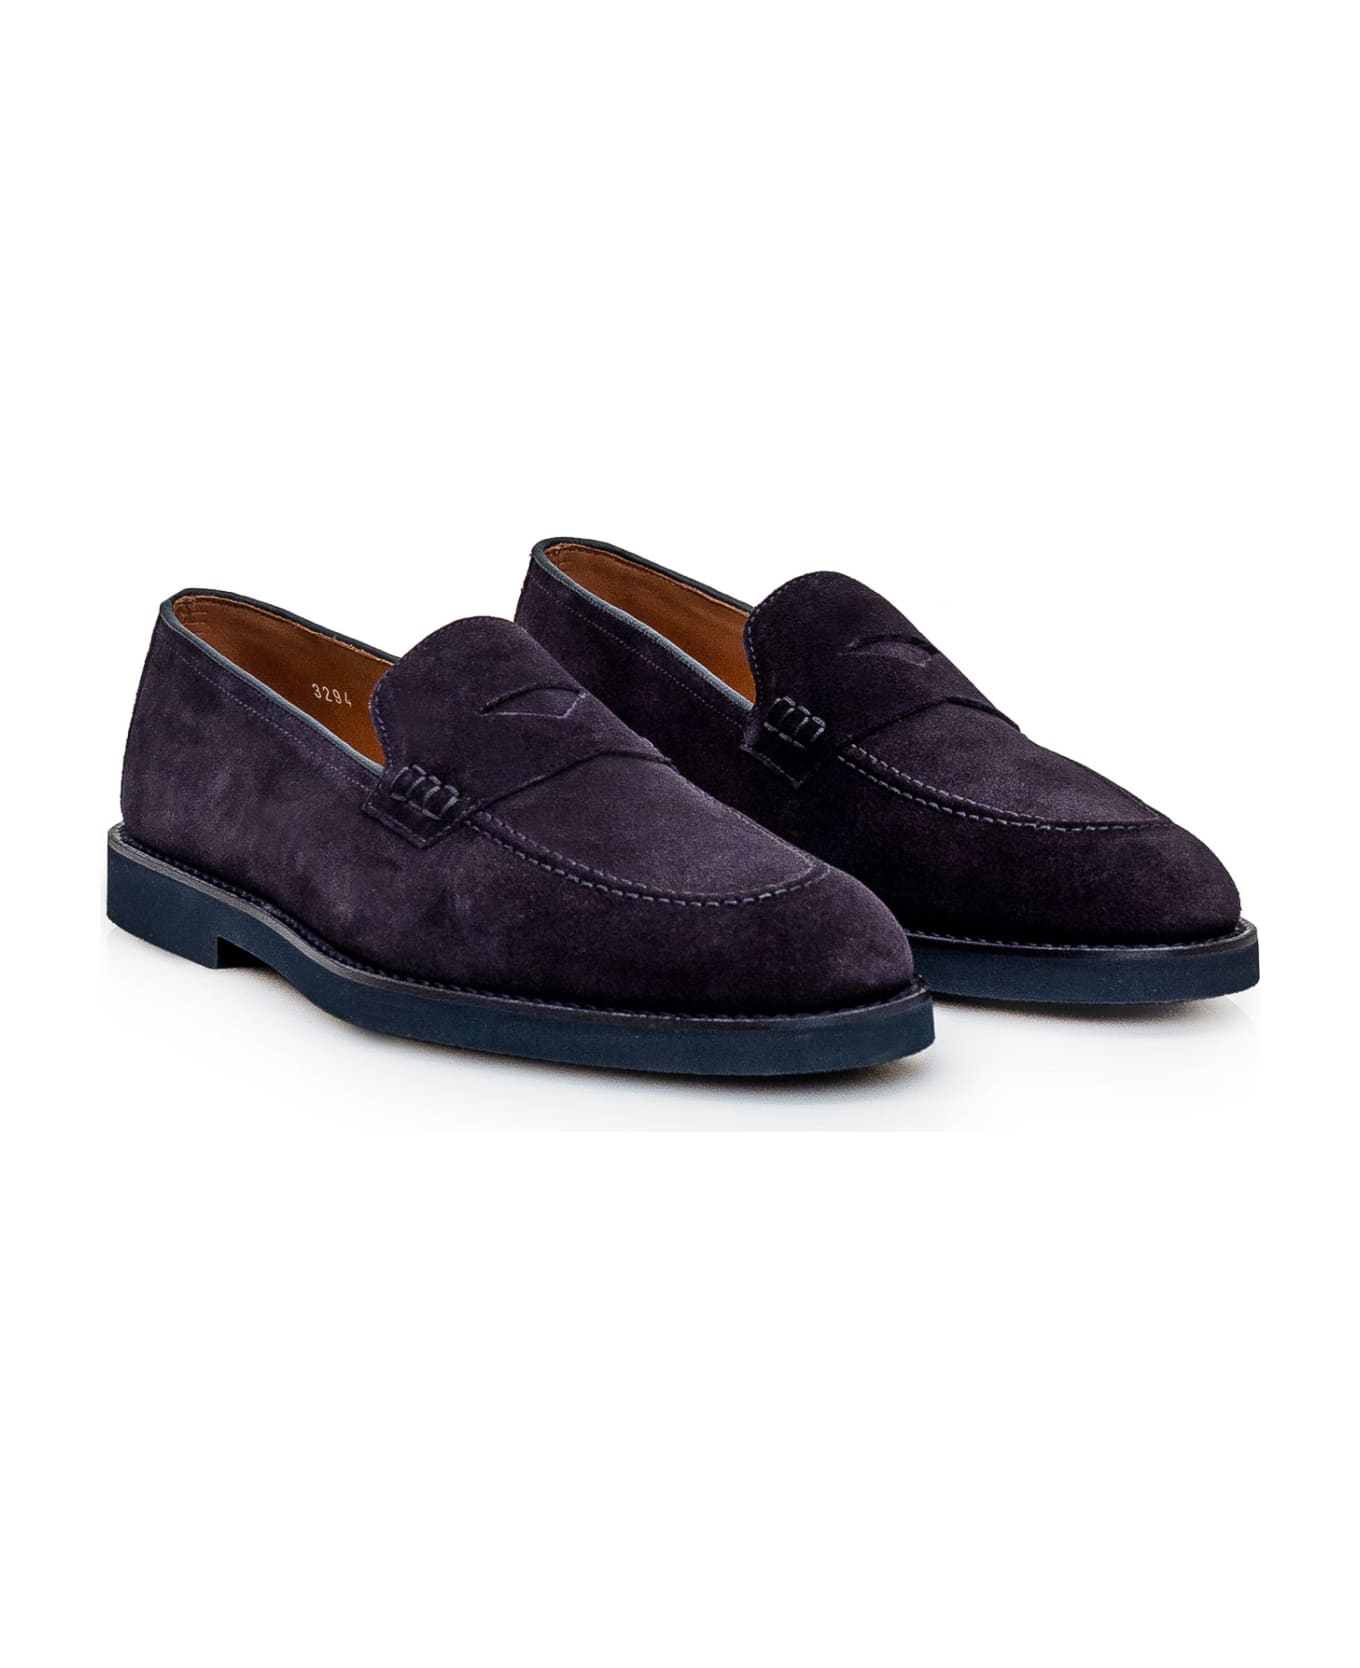 Doucal's Leather Loafer - BLU FDO BLU